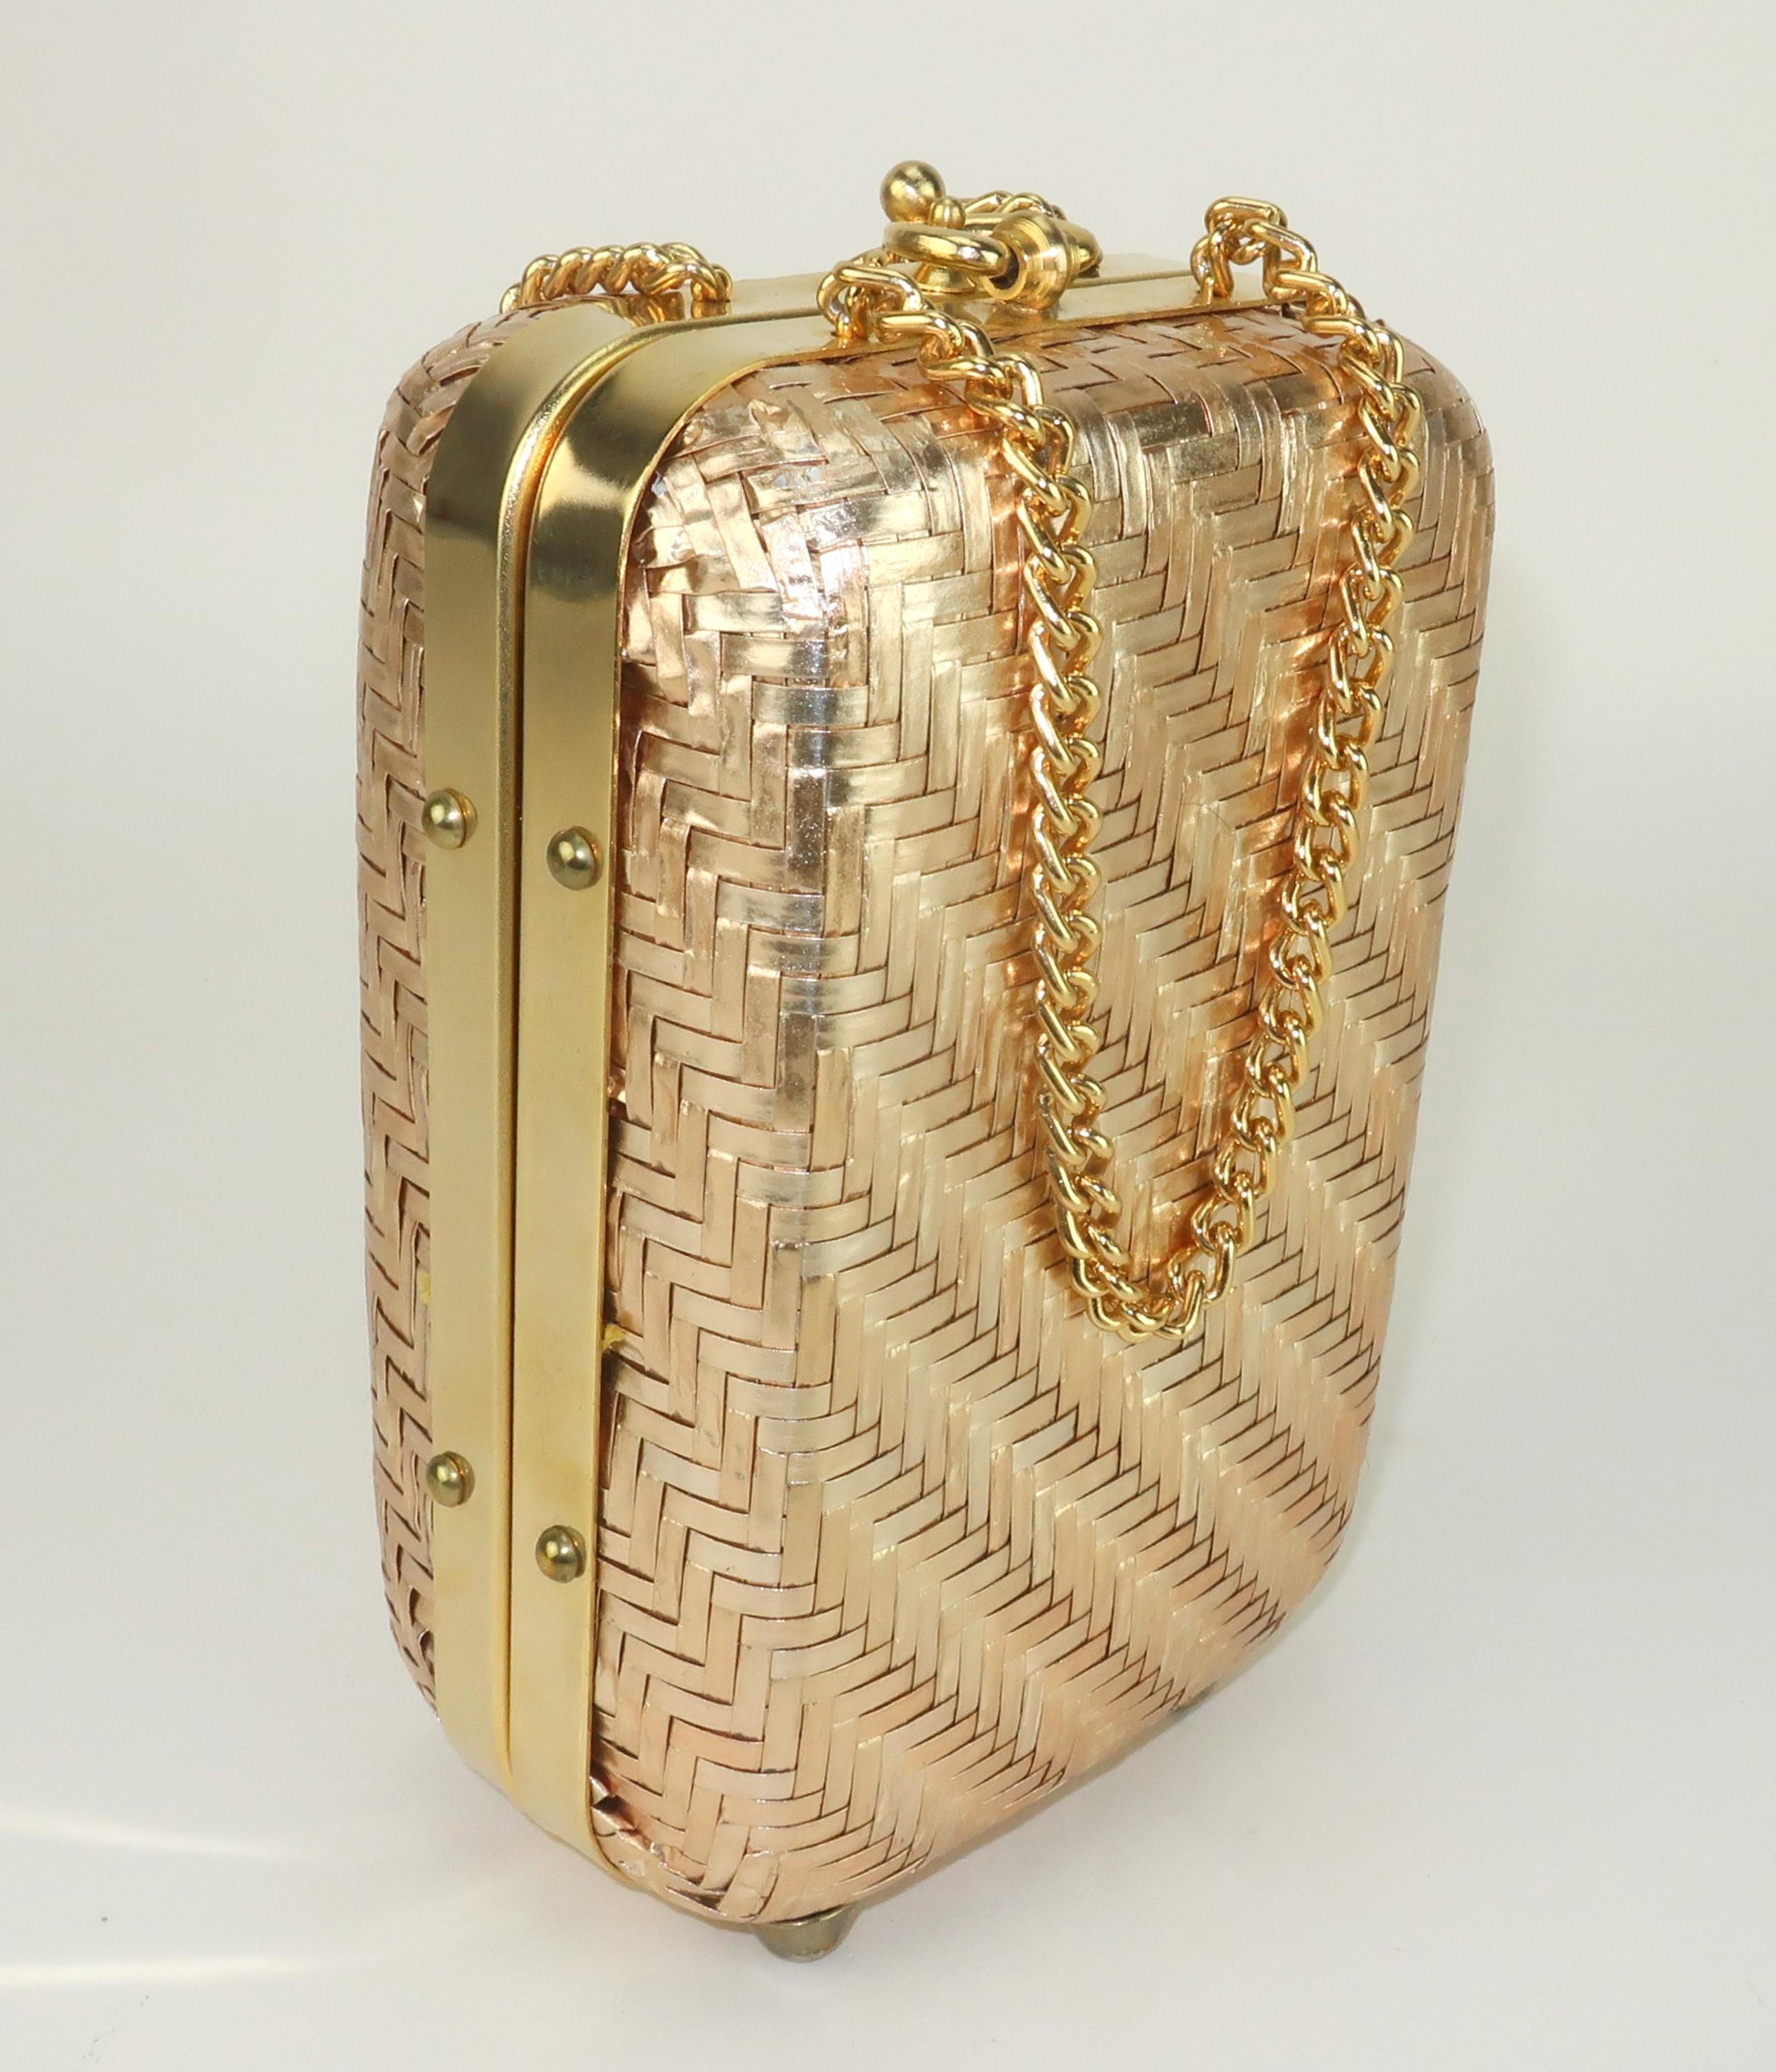 1960’s Italian gold straw casket shaped handbag with double chain handles.  The gold is a matte hue with a hint of champagne to the finish.  The gold tone metal frame is accented with studs and the handbag sits upright with cone shaped feet.  The